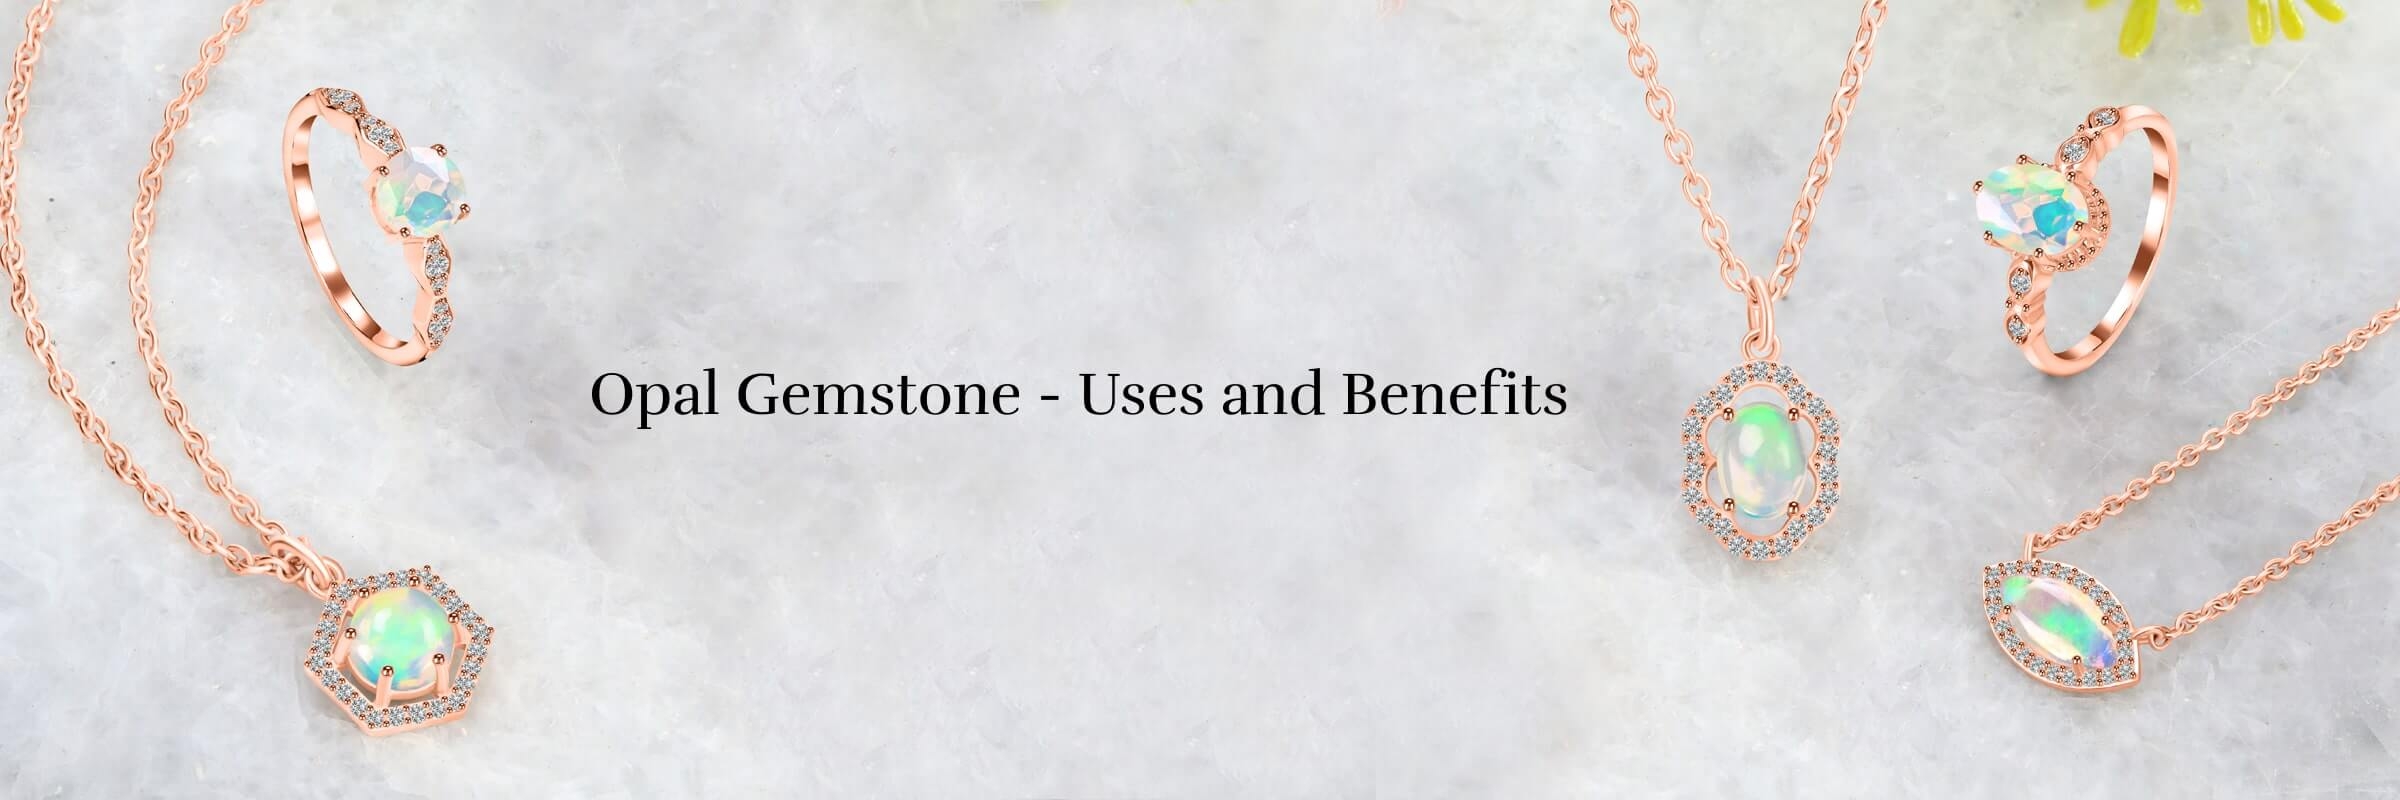 What Is The Benefit and Uses Of Opal Gemstone? 1